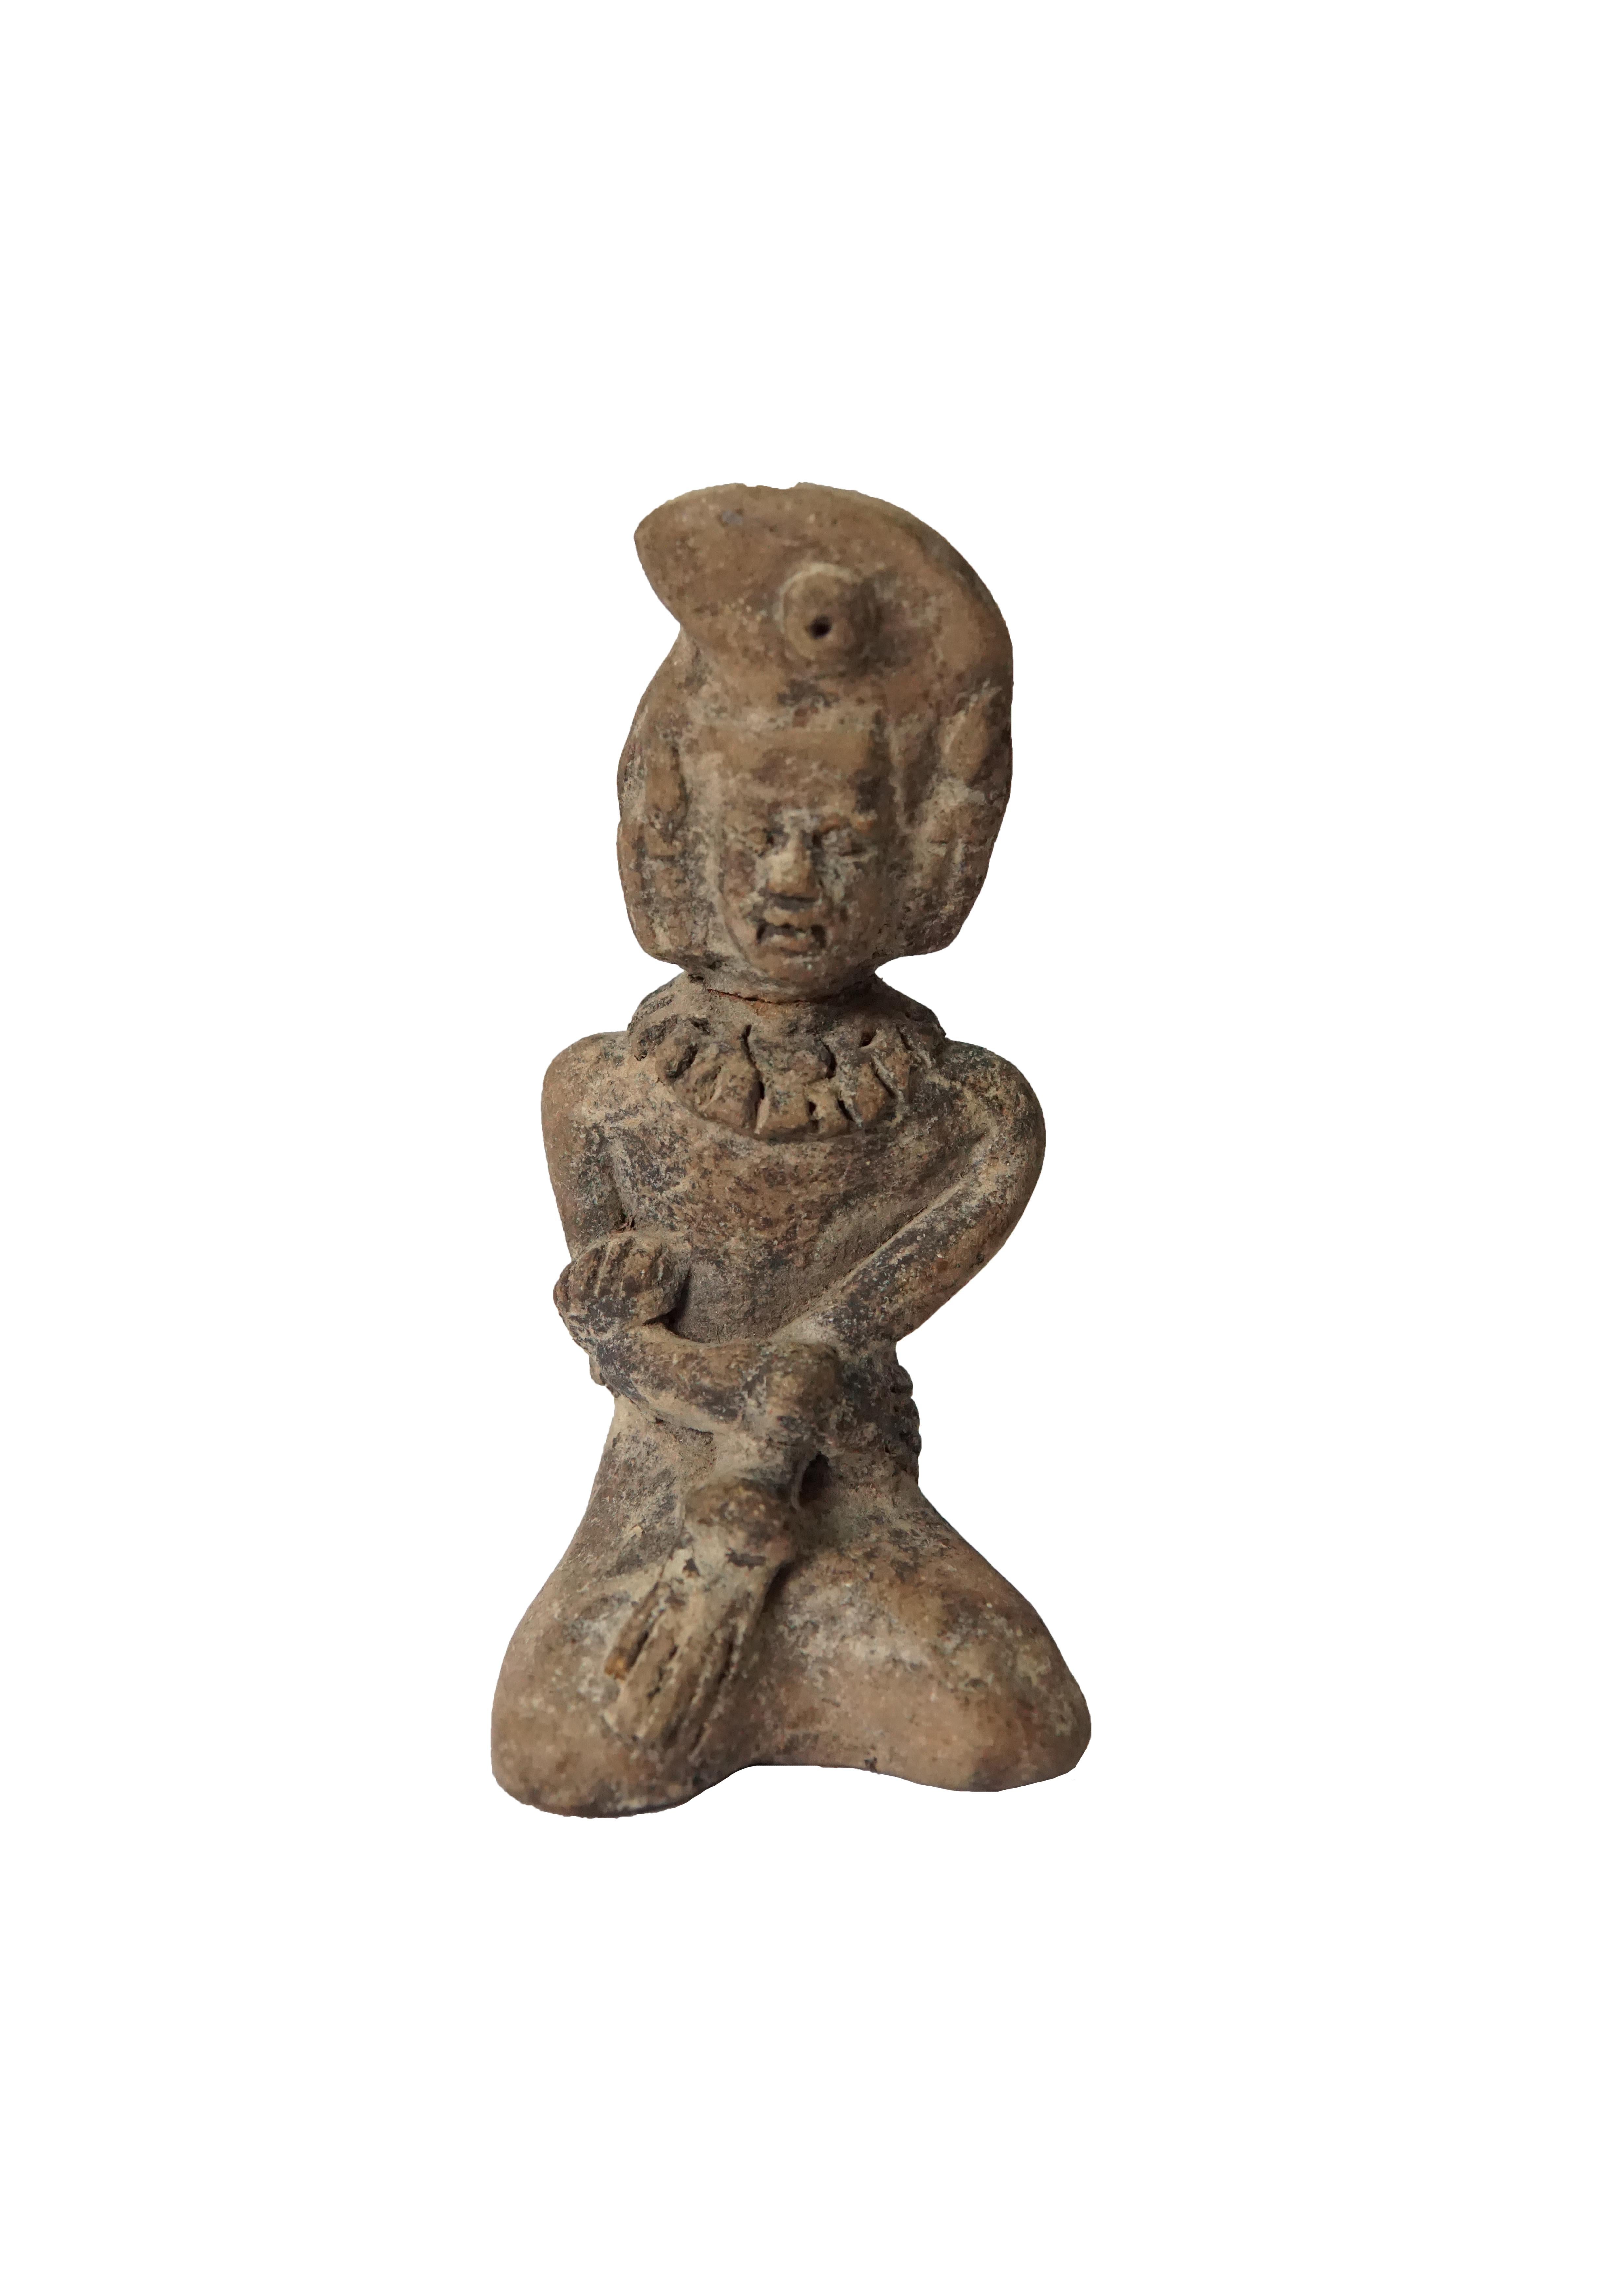 A visibly old pair of mold-formed terracota women kneeling, dating to the Majapahit Empire circa the 15th century. These were excavated amongst the shrines of Mount Penganggungan, East Java, Indonesia. Terracotta pottery was an important craft